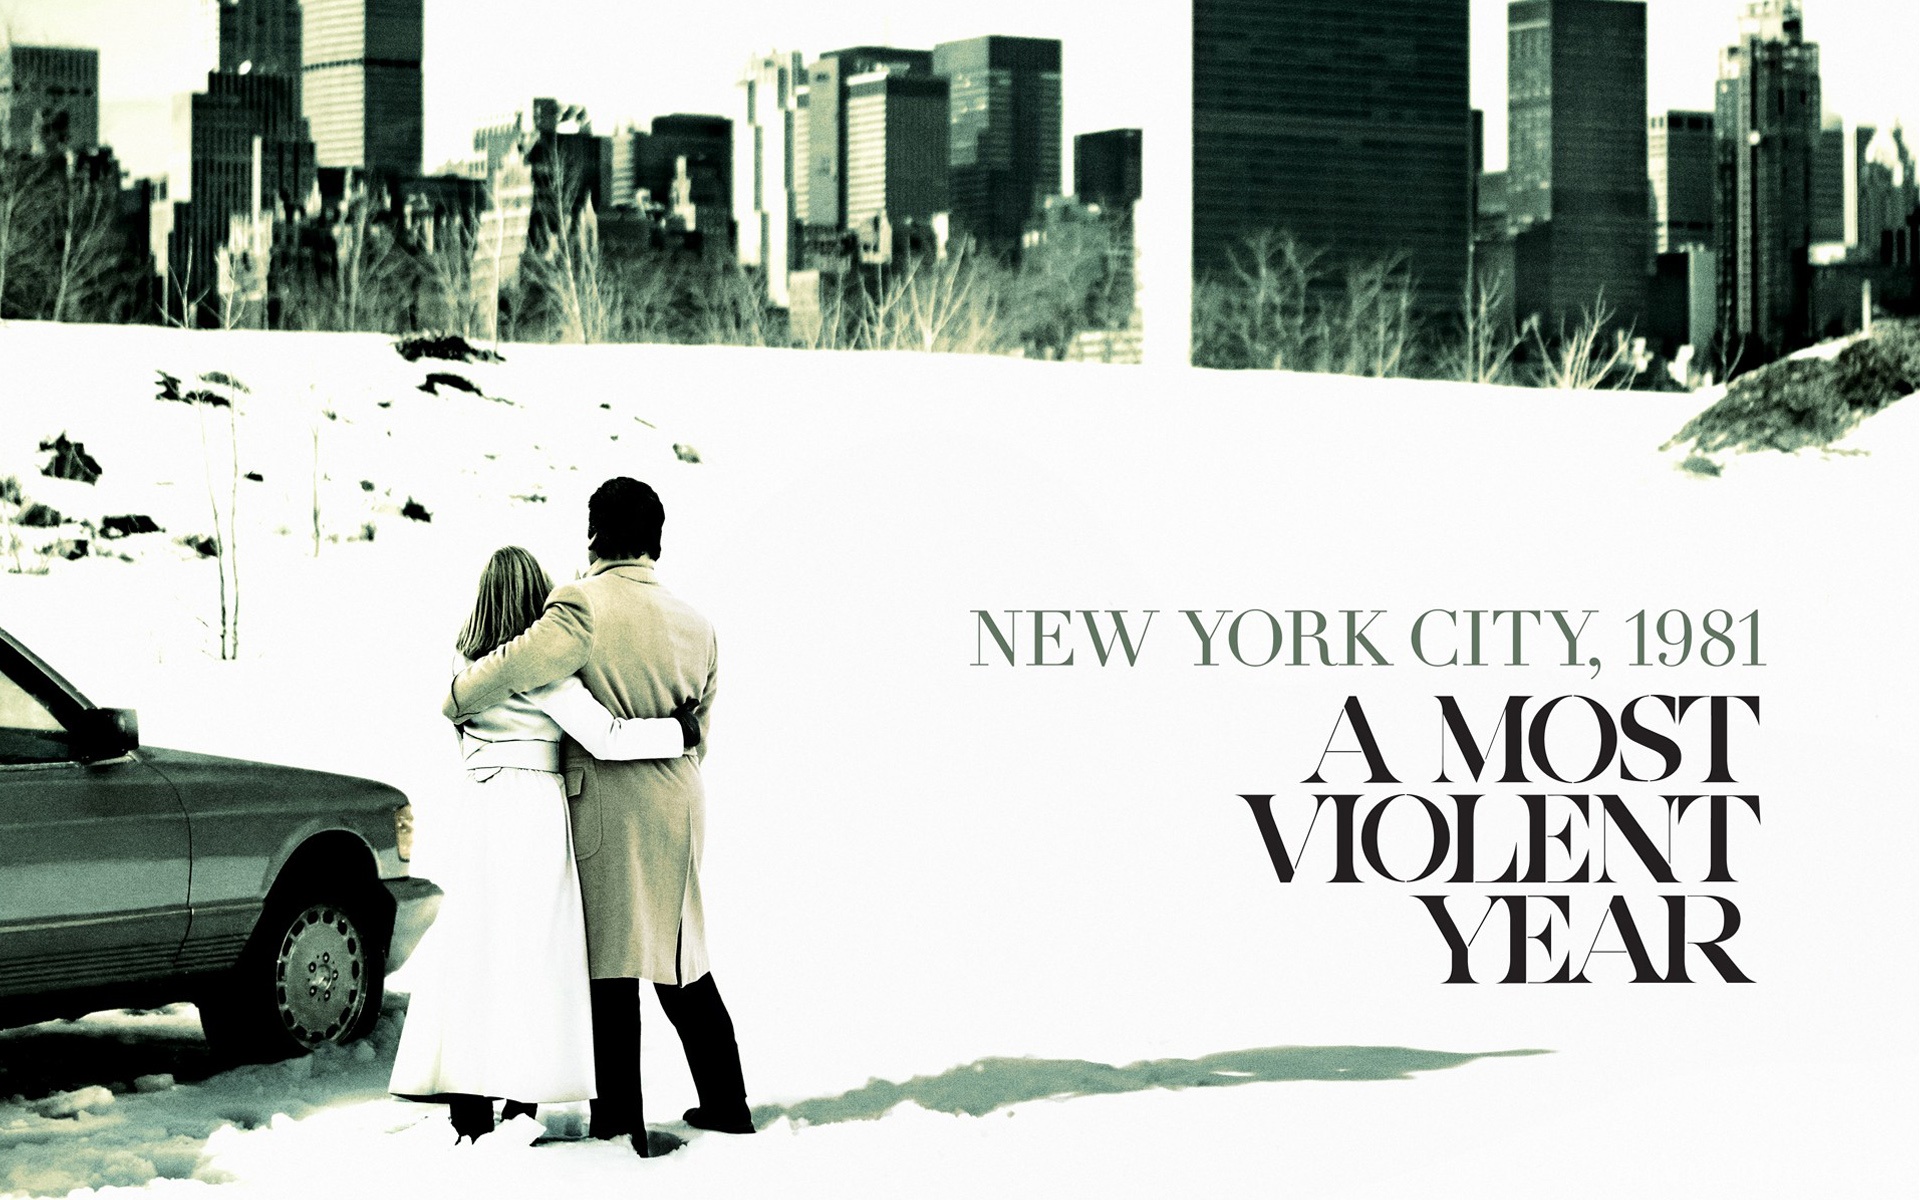 2014 A Most Violent Year